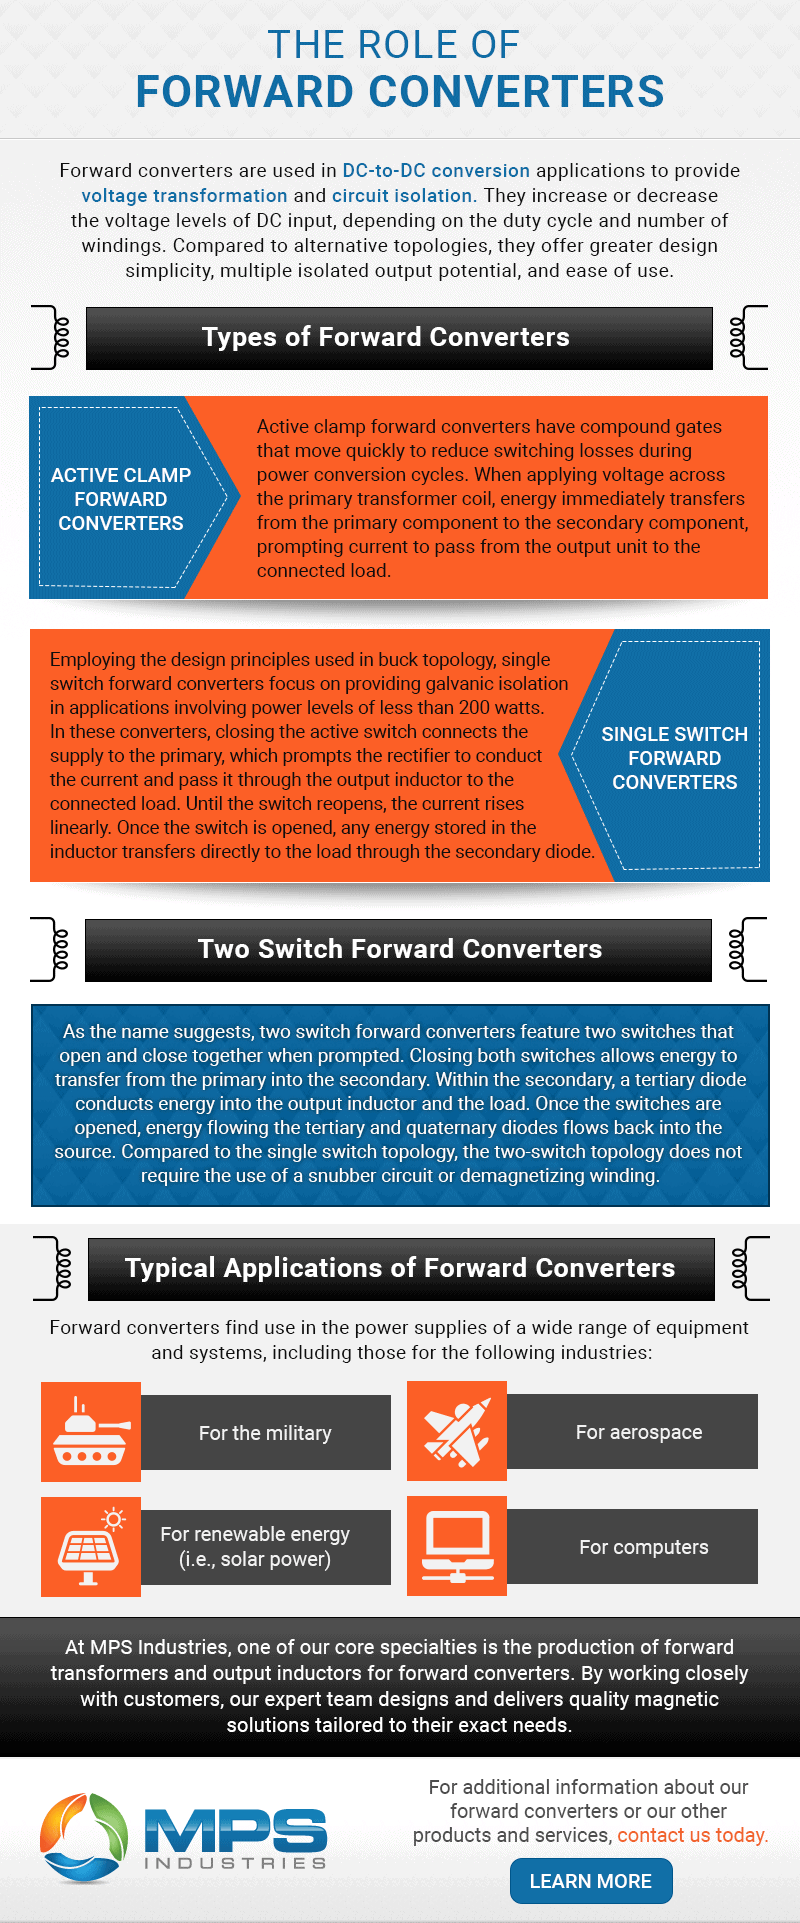 The Role of Forward Converters